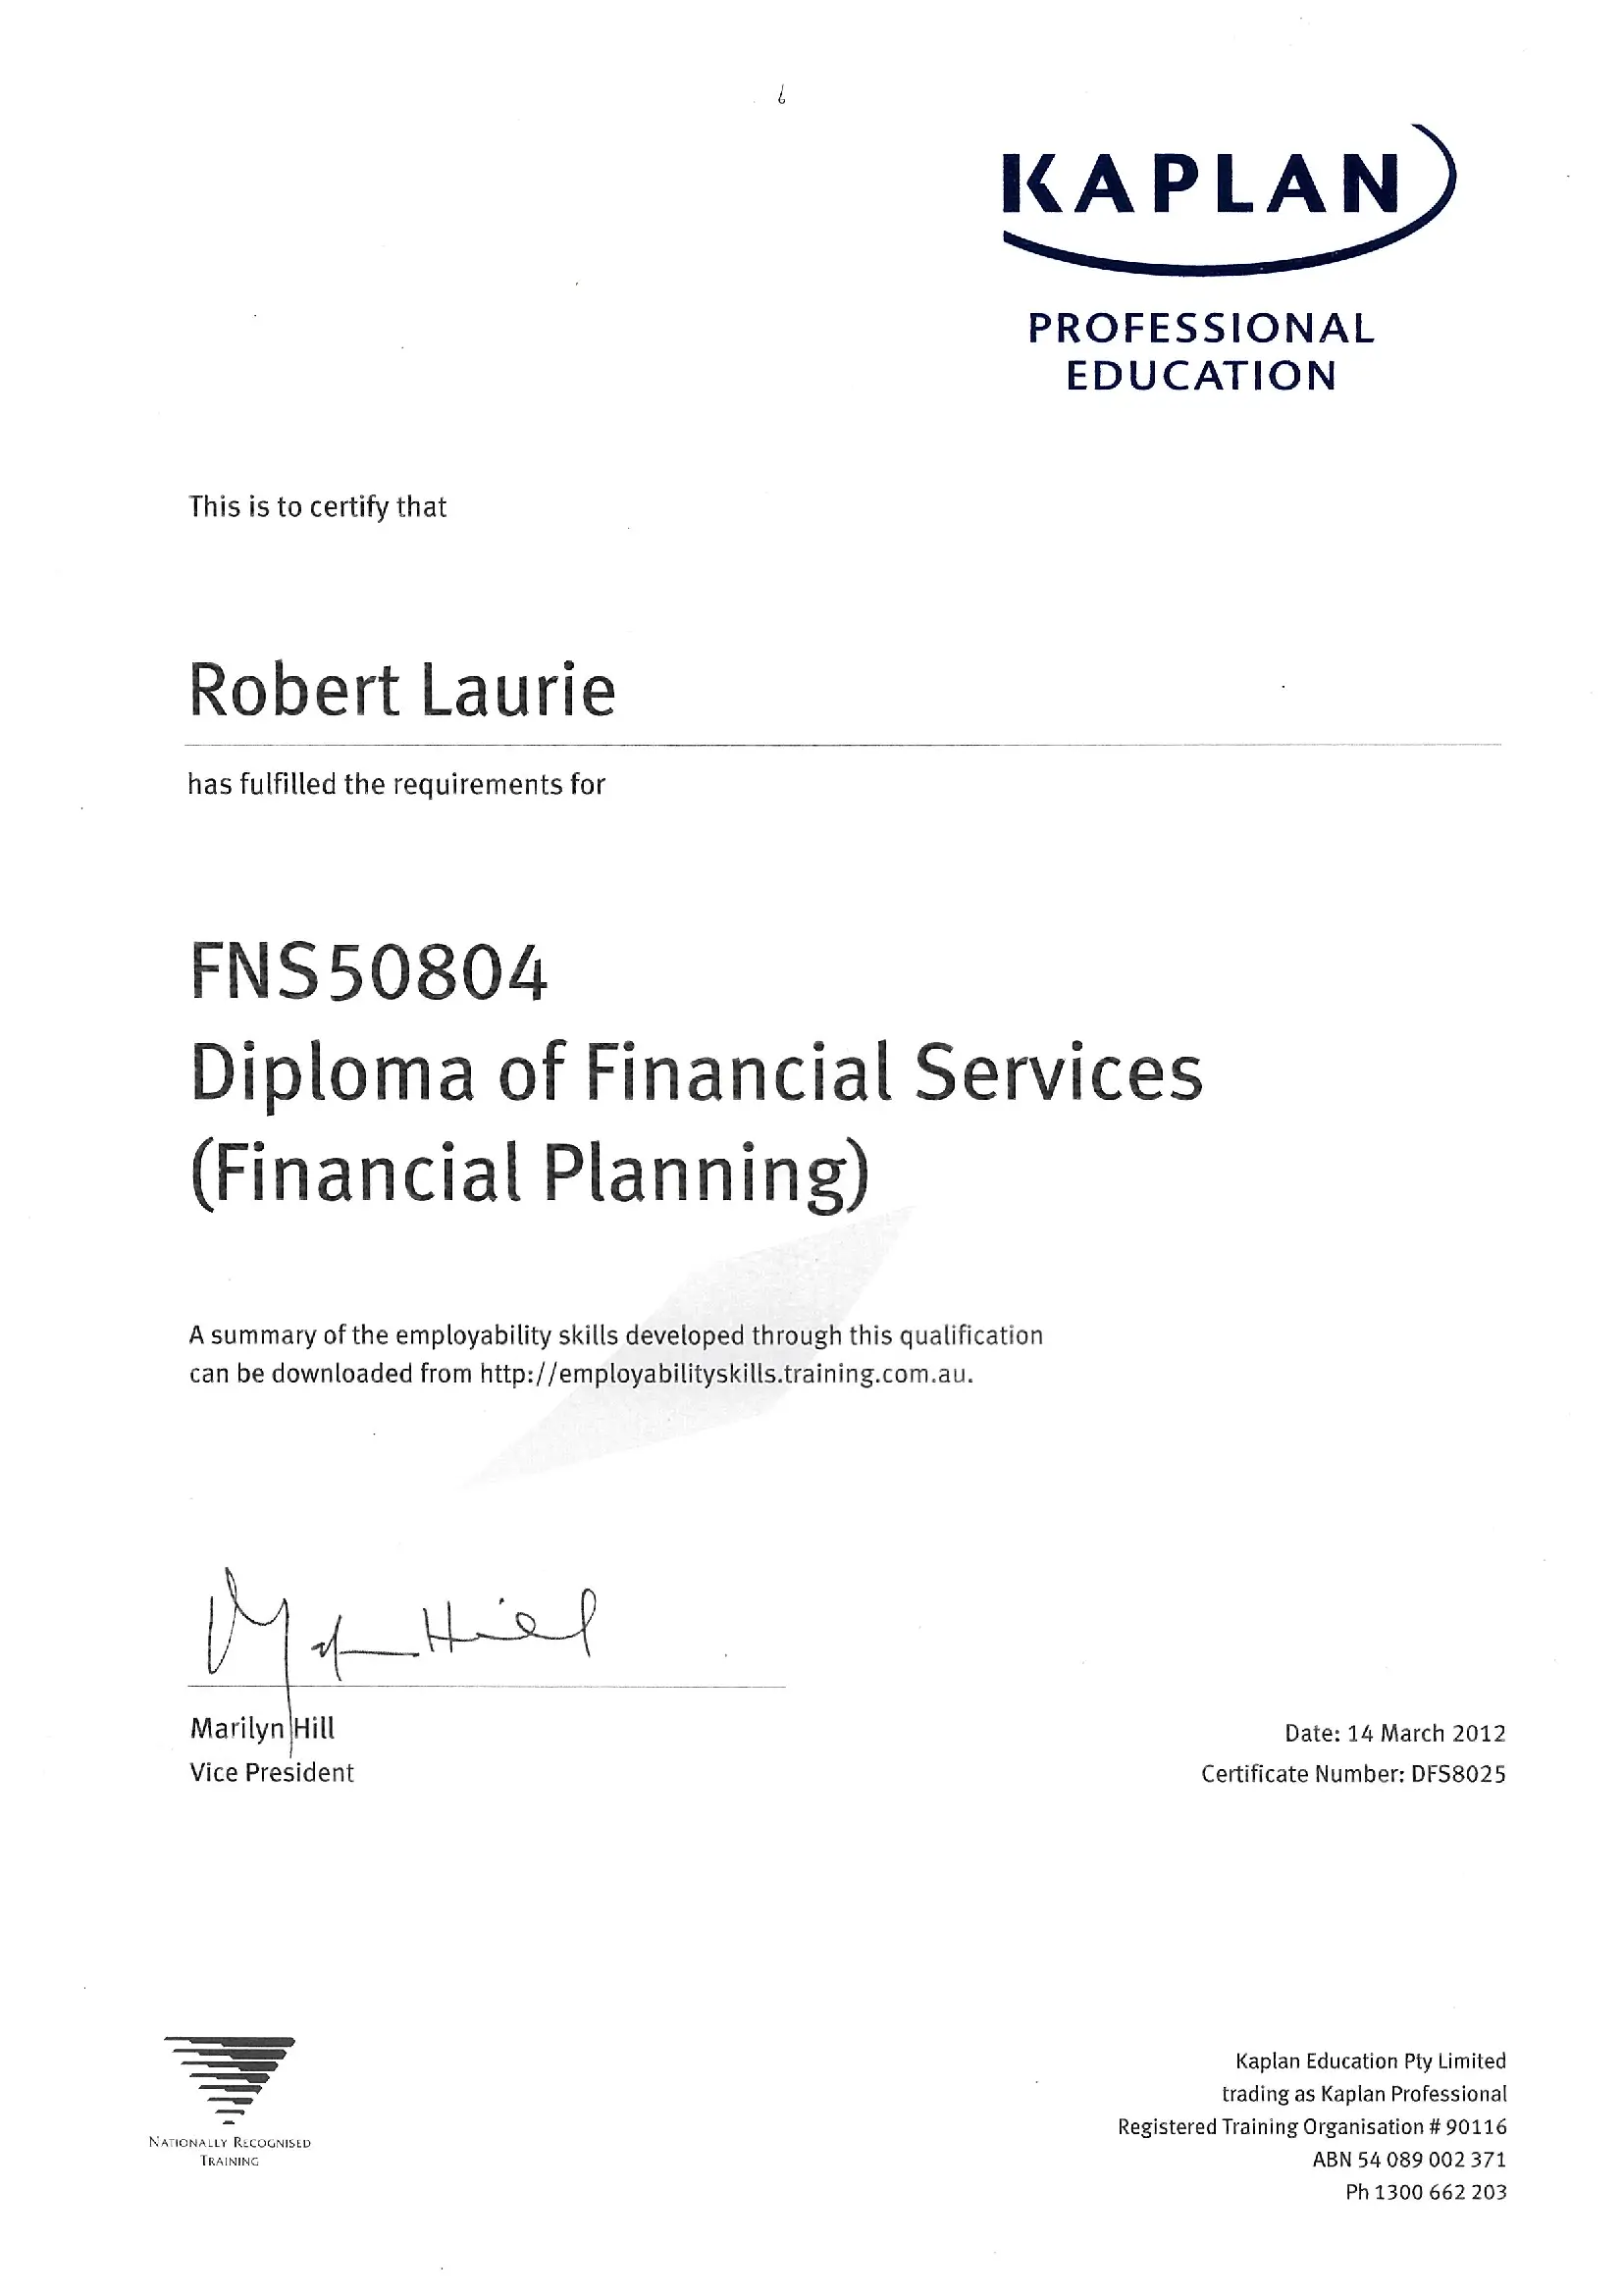 Diploma of Financial Services Certificate.